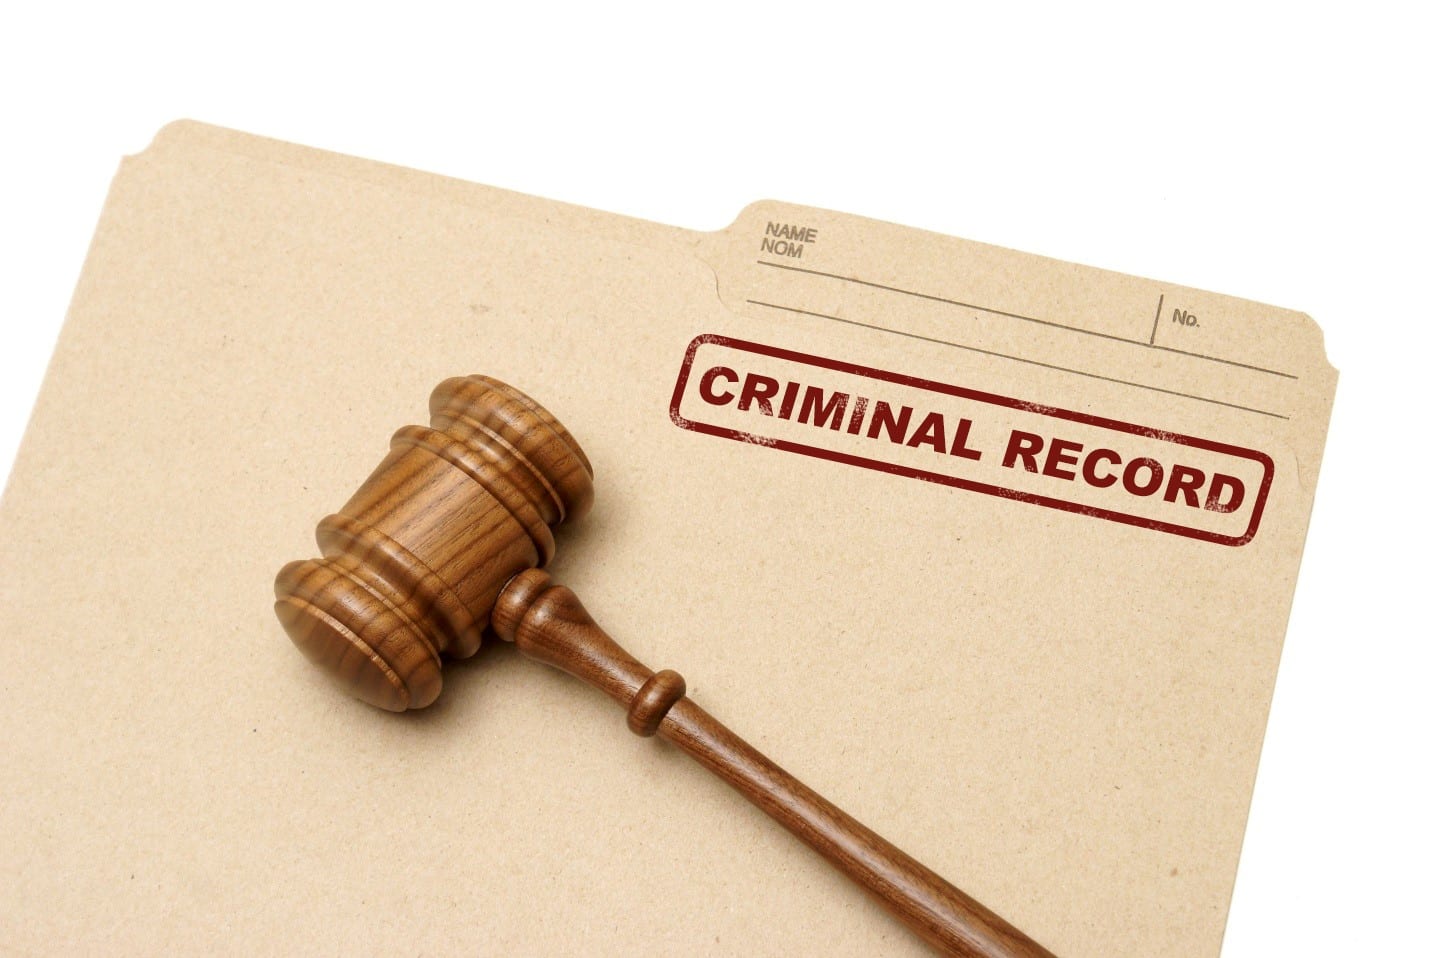 Beginning the Process of Expungement